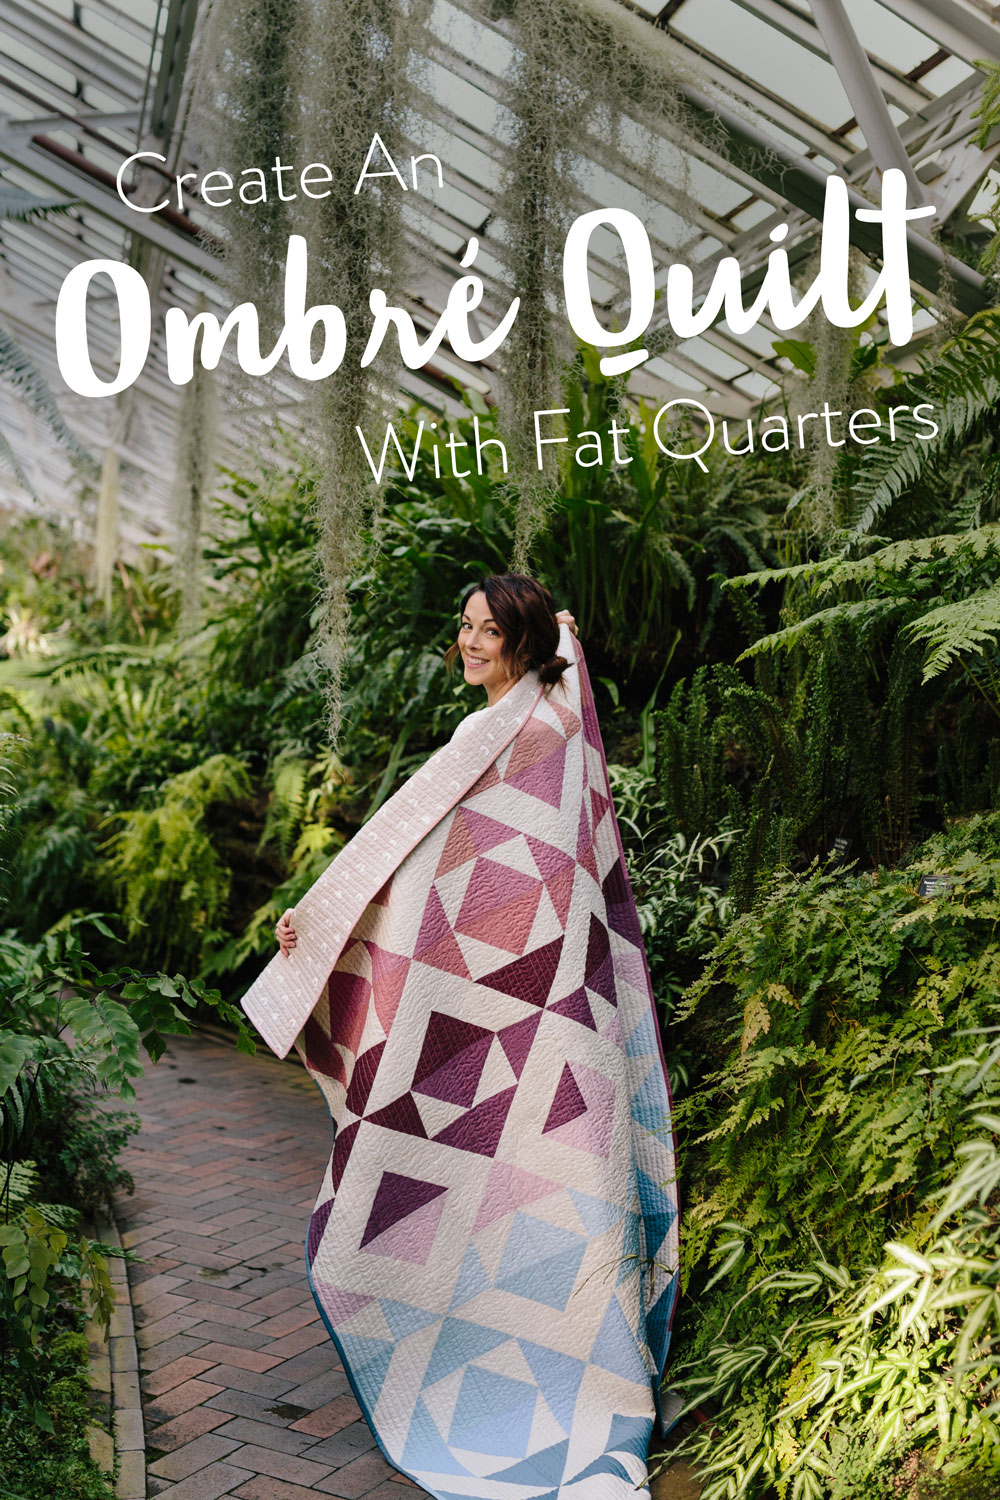 Change your favorite quilt pattern into an ombré quilt by converting yardage into fat quarters. Included is a half square triangle conversion chart and tutorial! | Suzy Quilts #halfsquaretriangle  #quilt #ombrequilt